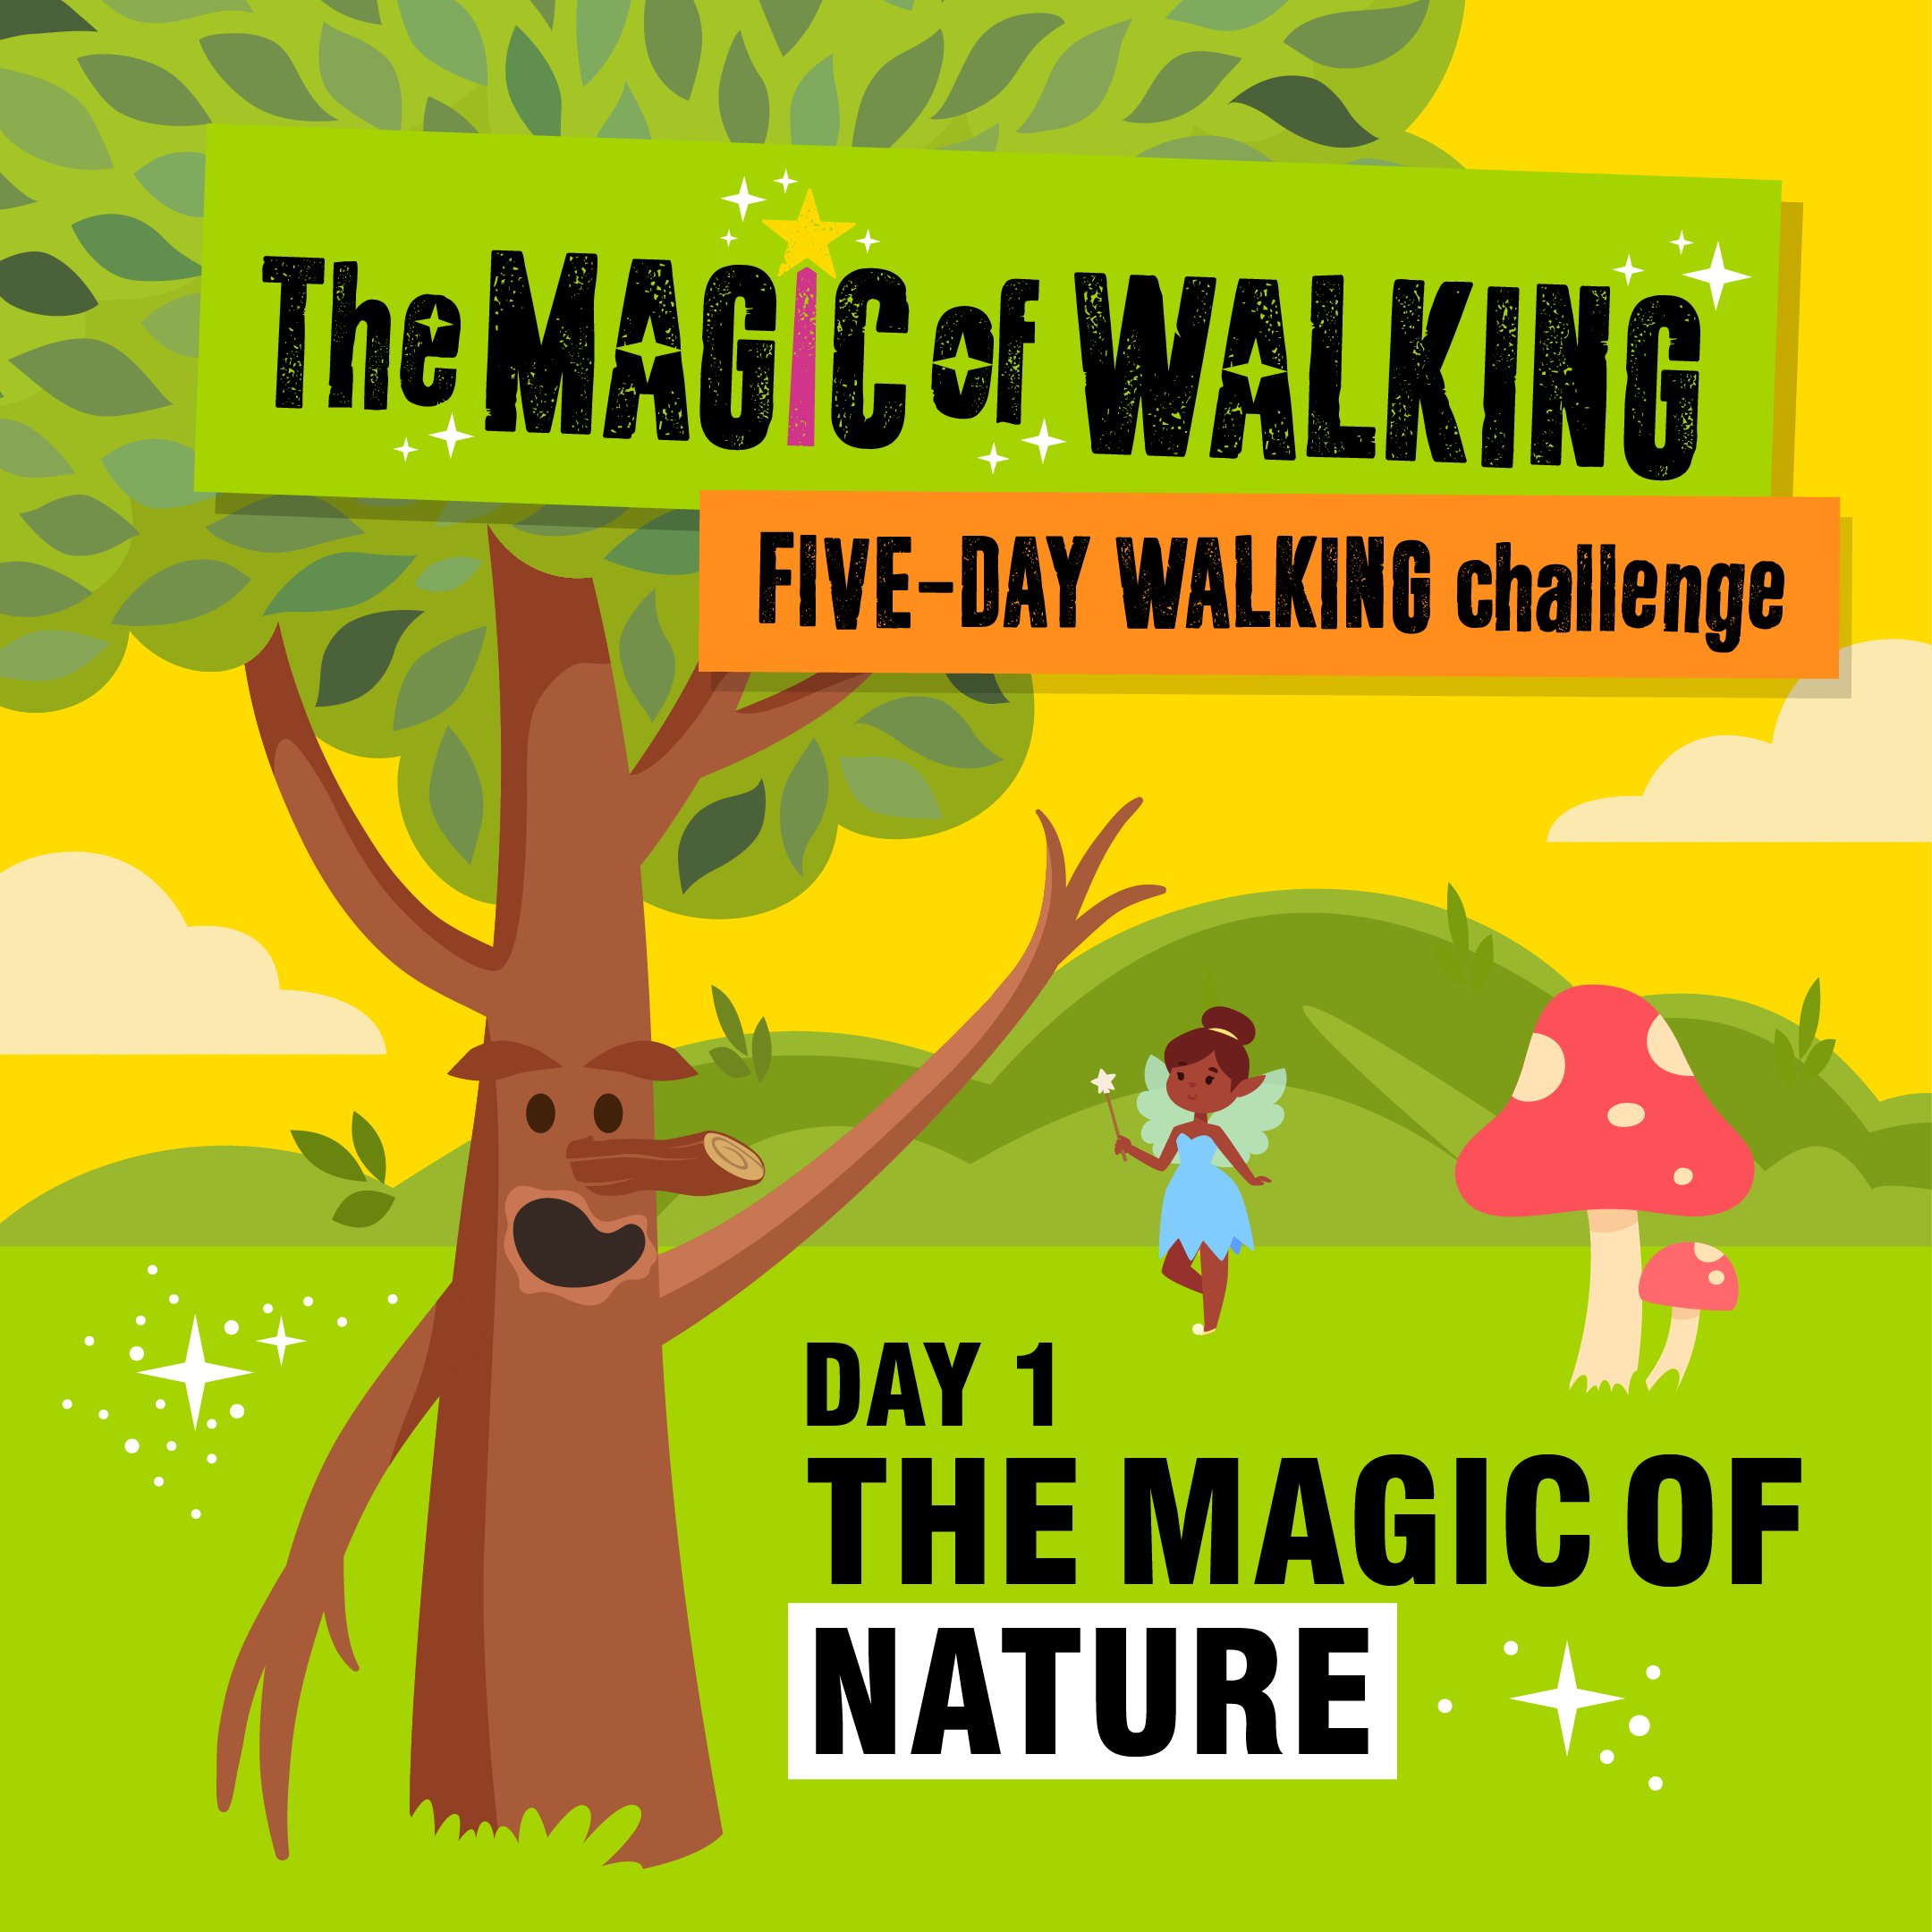 Day 1 - The magic of nature